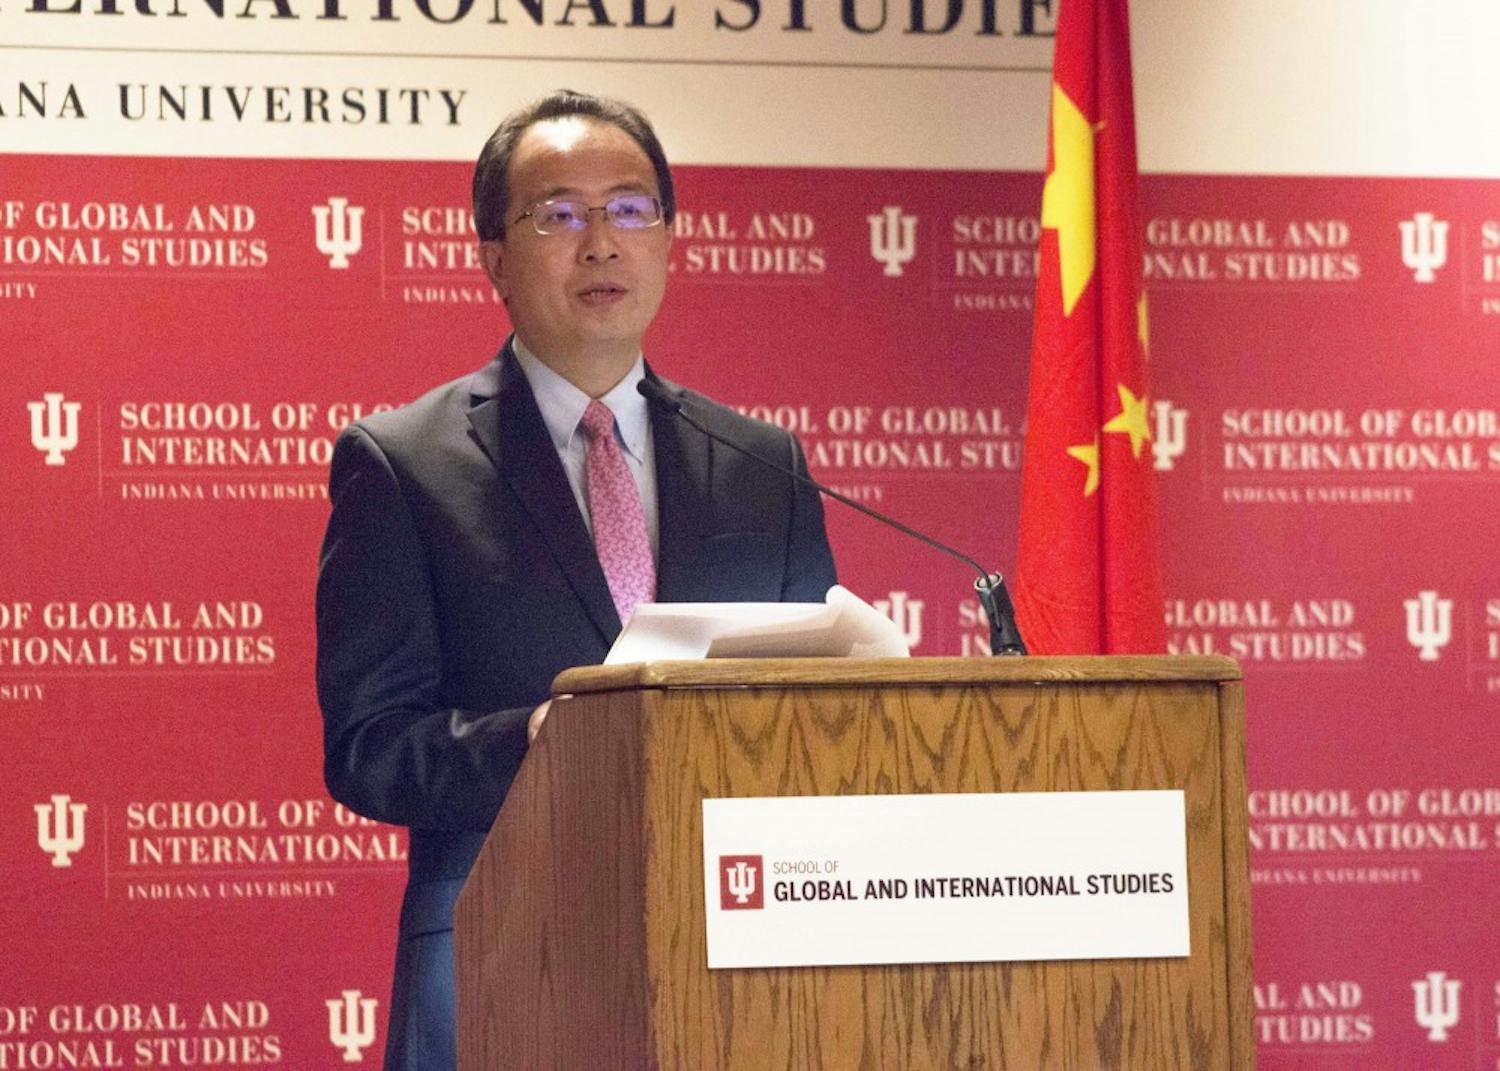 Hong Lei, the consul general of the People's Republic of China in Chicago, gives a speech on China's recent advances and the relationship between China and the United States on Monday afternoon in the IU Auditorium. Lei spent the day on IU's campus meeting with students and faculty.